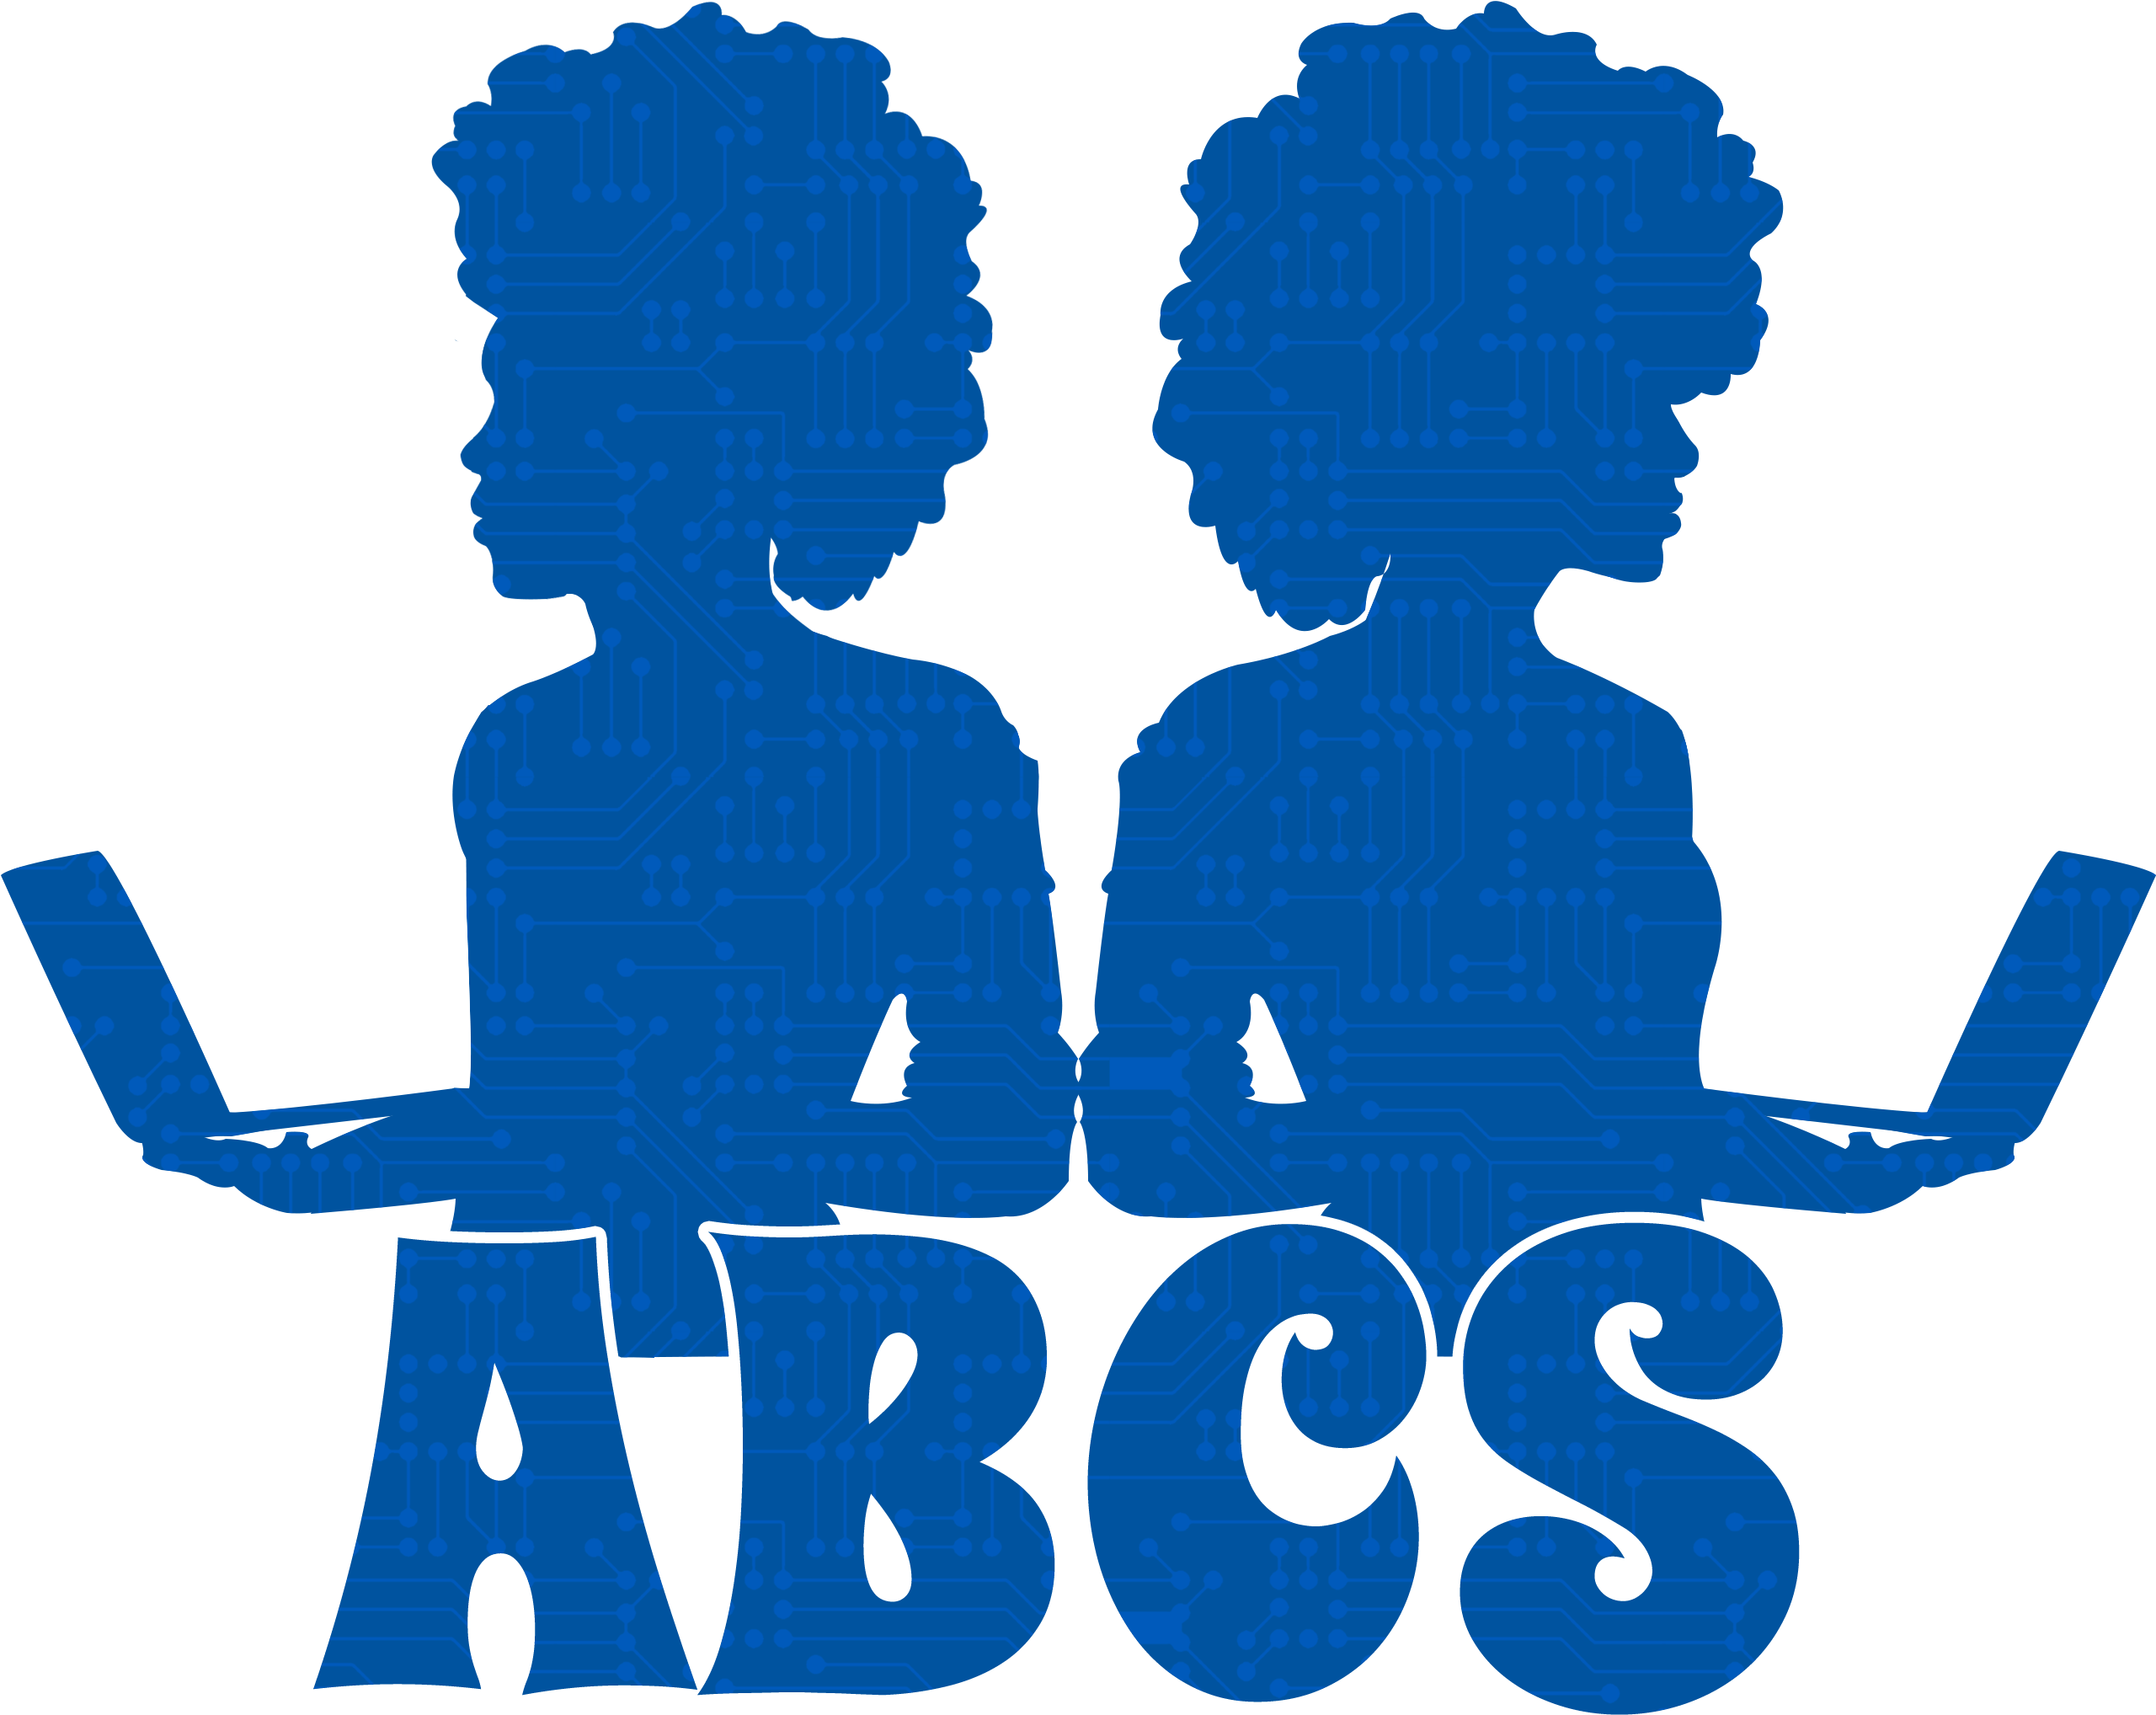 The Association Of Black Computer Scientists Is A Student - The Association Of Black Computer Scientists Is A Student (2974x2419)